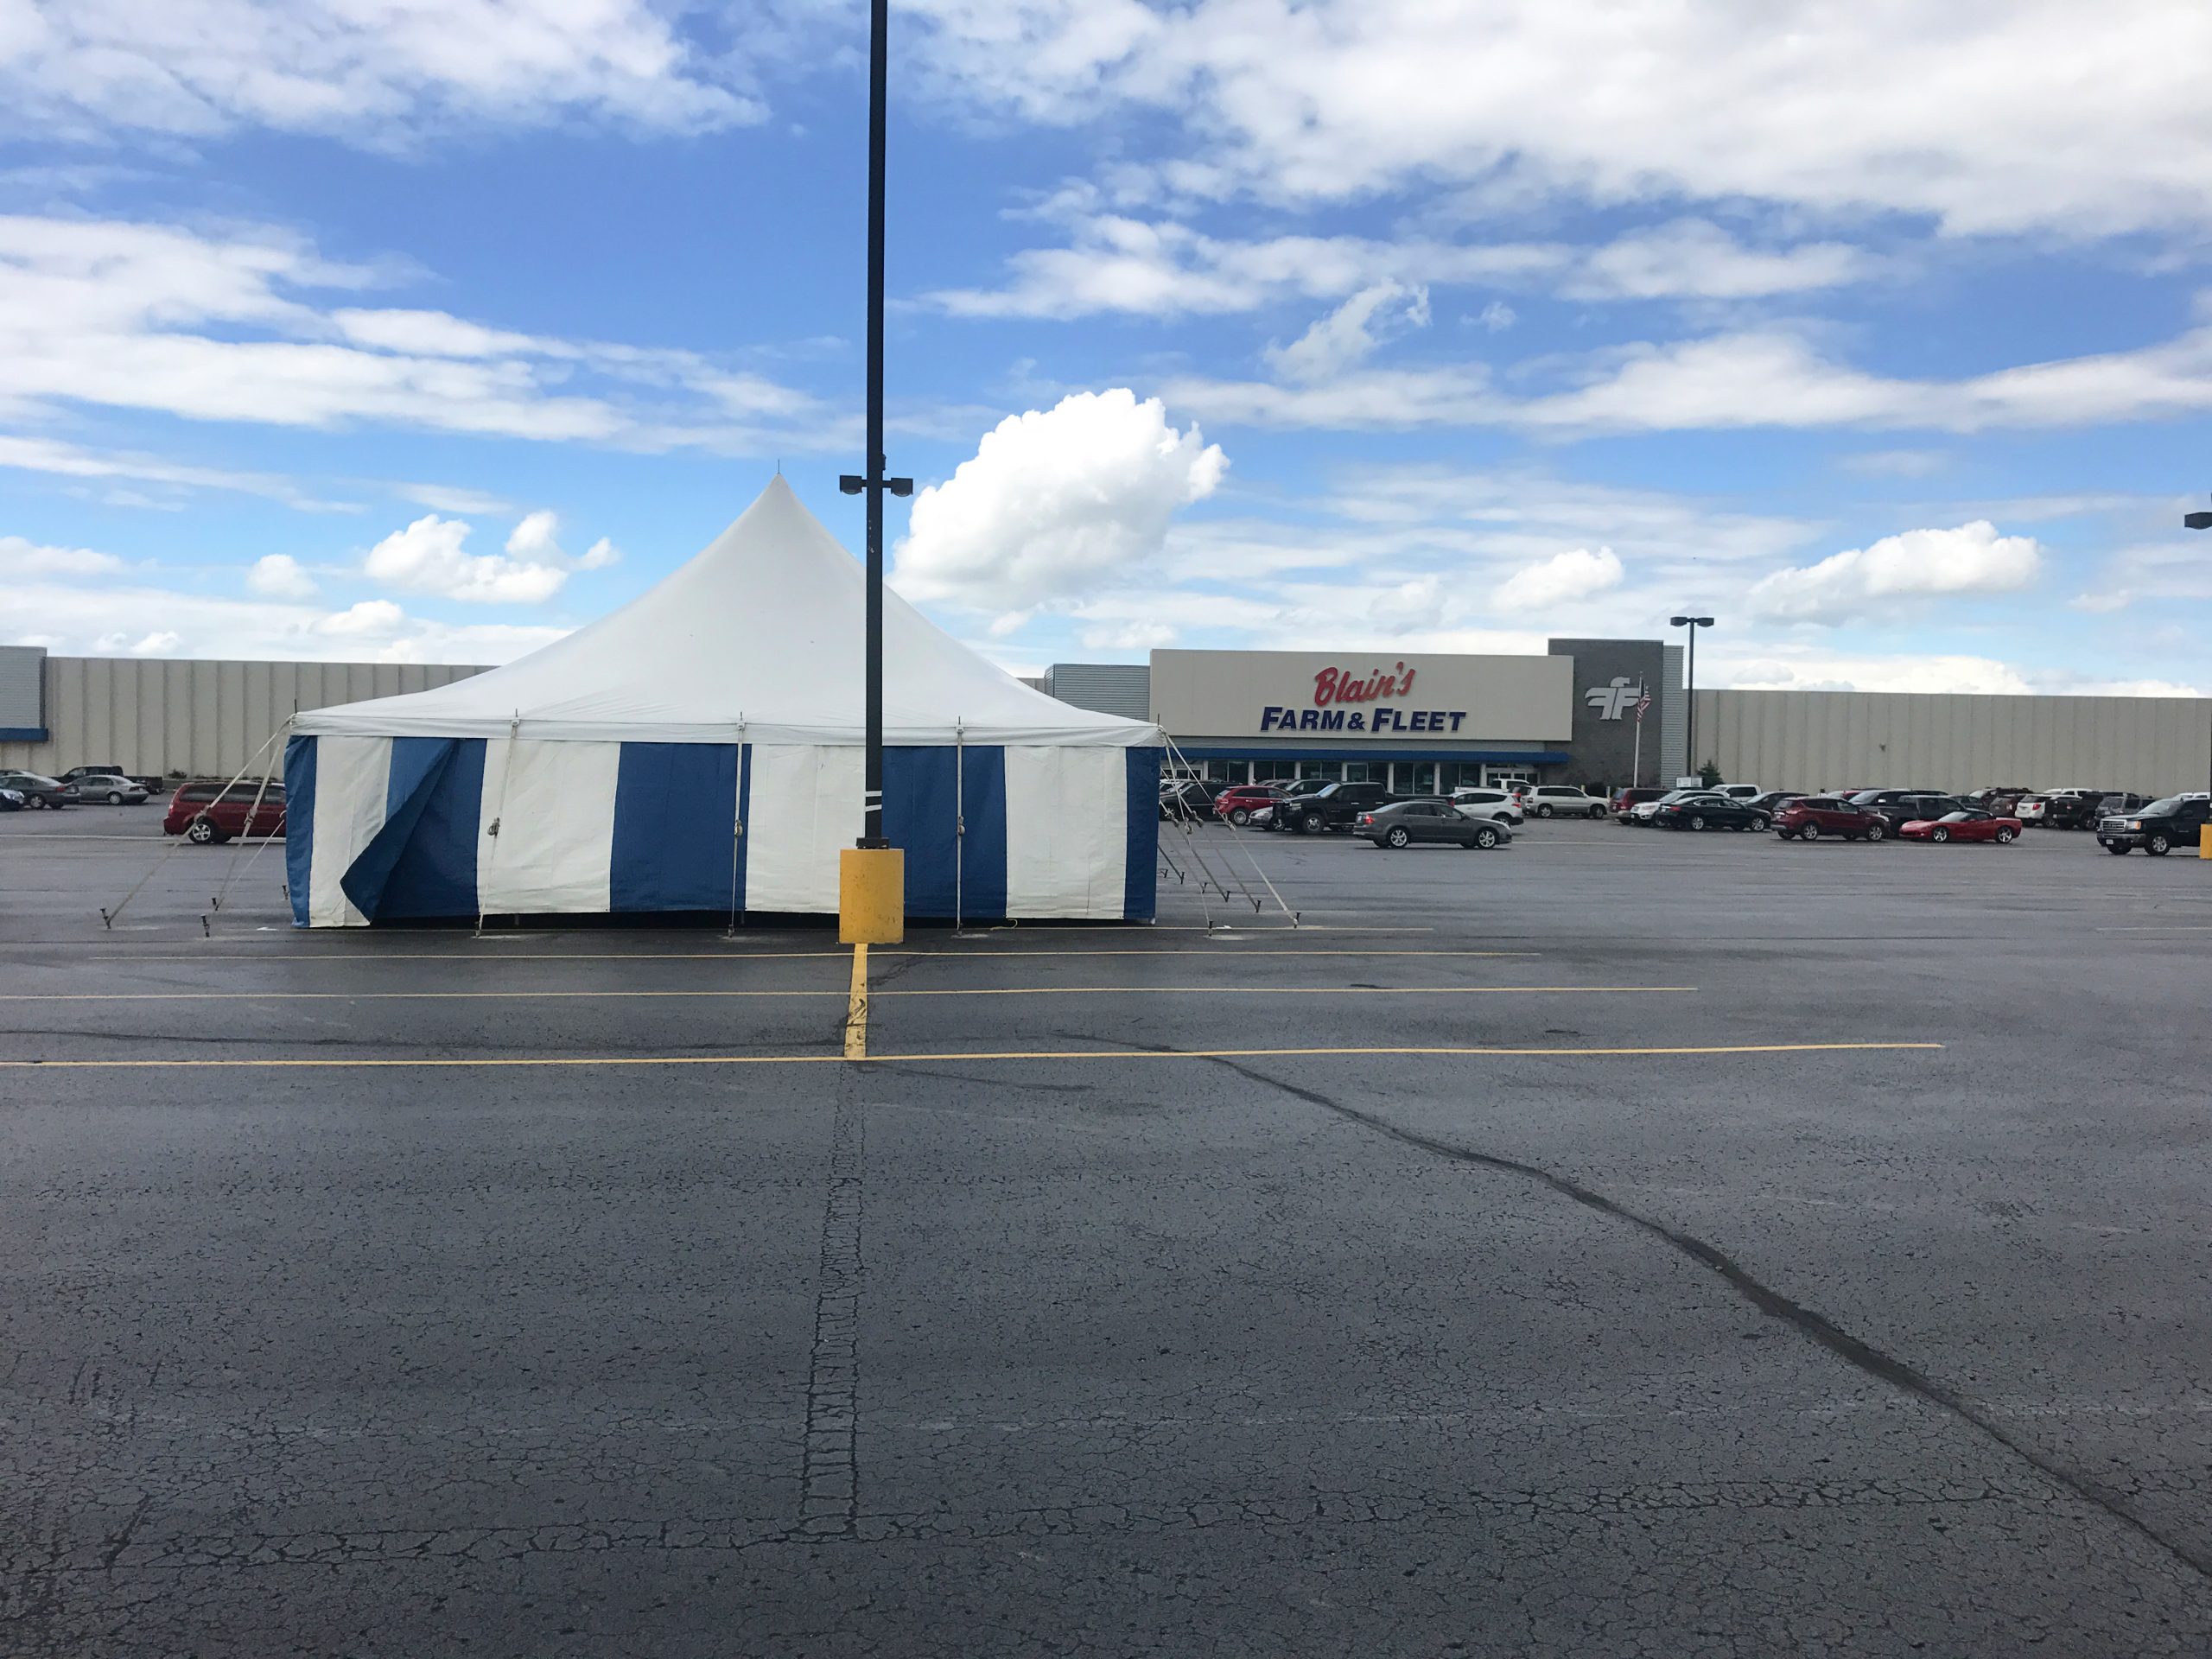 30' x 60' rope and pole tent with blue and white sidewall for Ka-Boomers Fireworks stand in Cedar Falls, Iowa